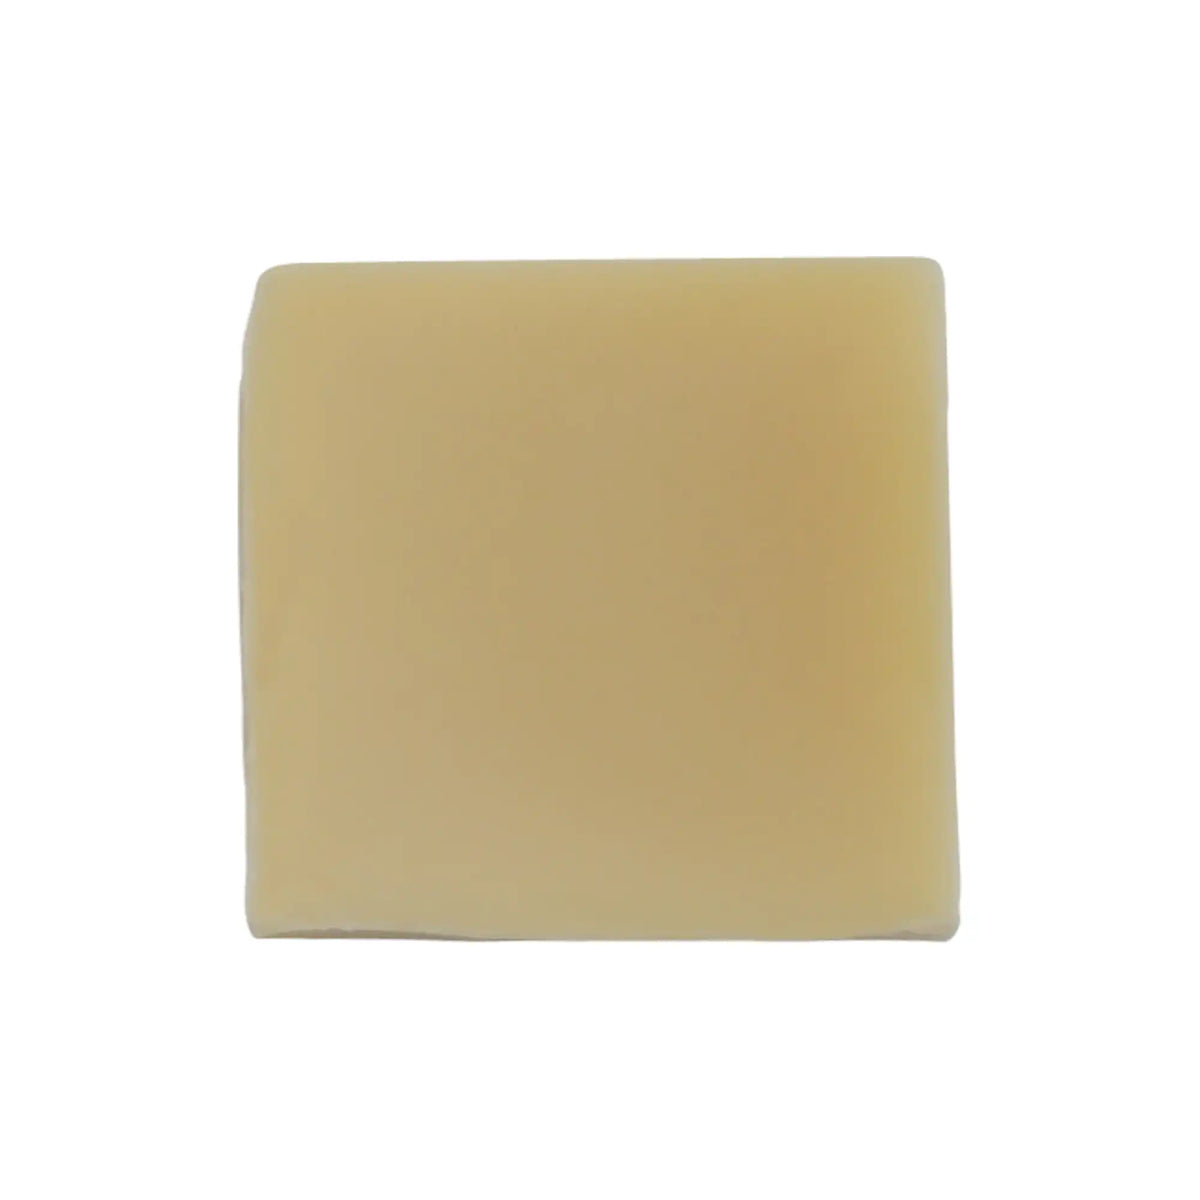 Natural Organic Coconutty Soap